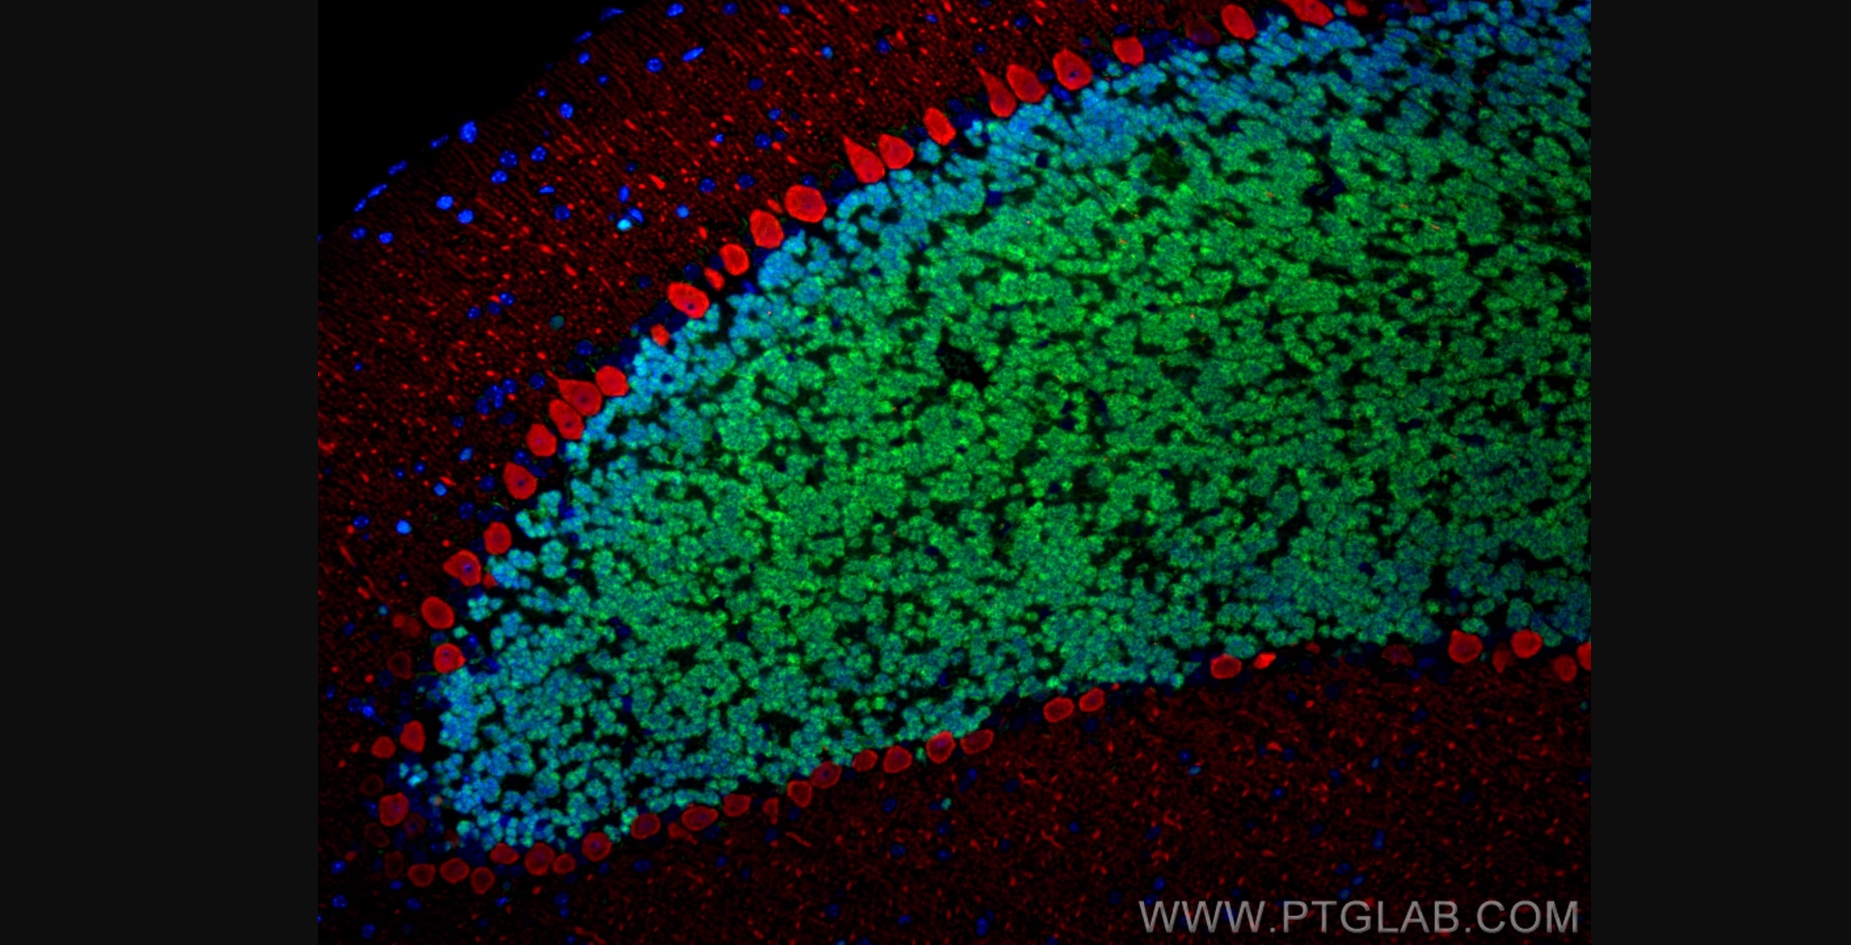 Immunofluorescence analysis of mouse cerebellum FFPE tissue stained with anti-NeuN rabbit polyclonal antibody (26975-1-AP, green) and anti-Calbindin-D28k mouse monoclonal antibody (66394-1-Ig, red). Multi-rAb CoraLite® Plus 488-Goat Anti-Rabbit Recombinant Secondary Antibody (H+L) (RGAR002, 1:500) and Multi-rAb CoraLite® Plus 594-Goat Anti-Mouse Recombinant Secondary Antibody (H+L) (RGAM004, 1:500) were used for detection.  